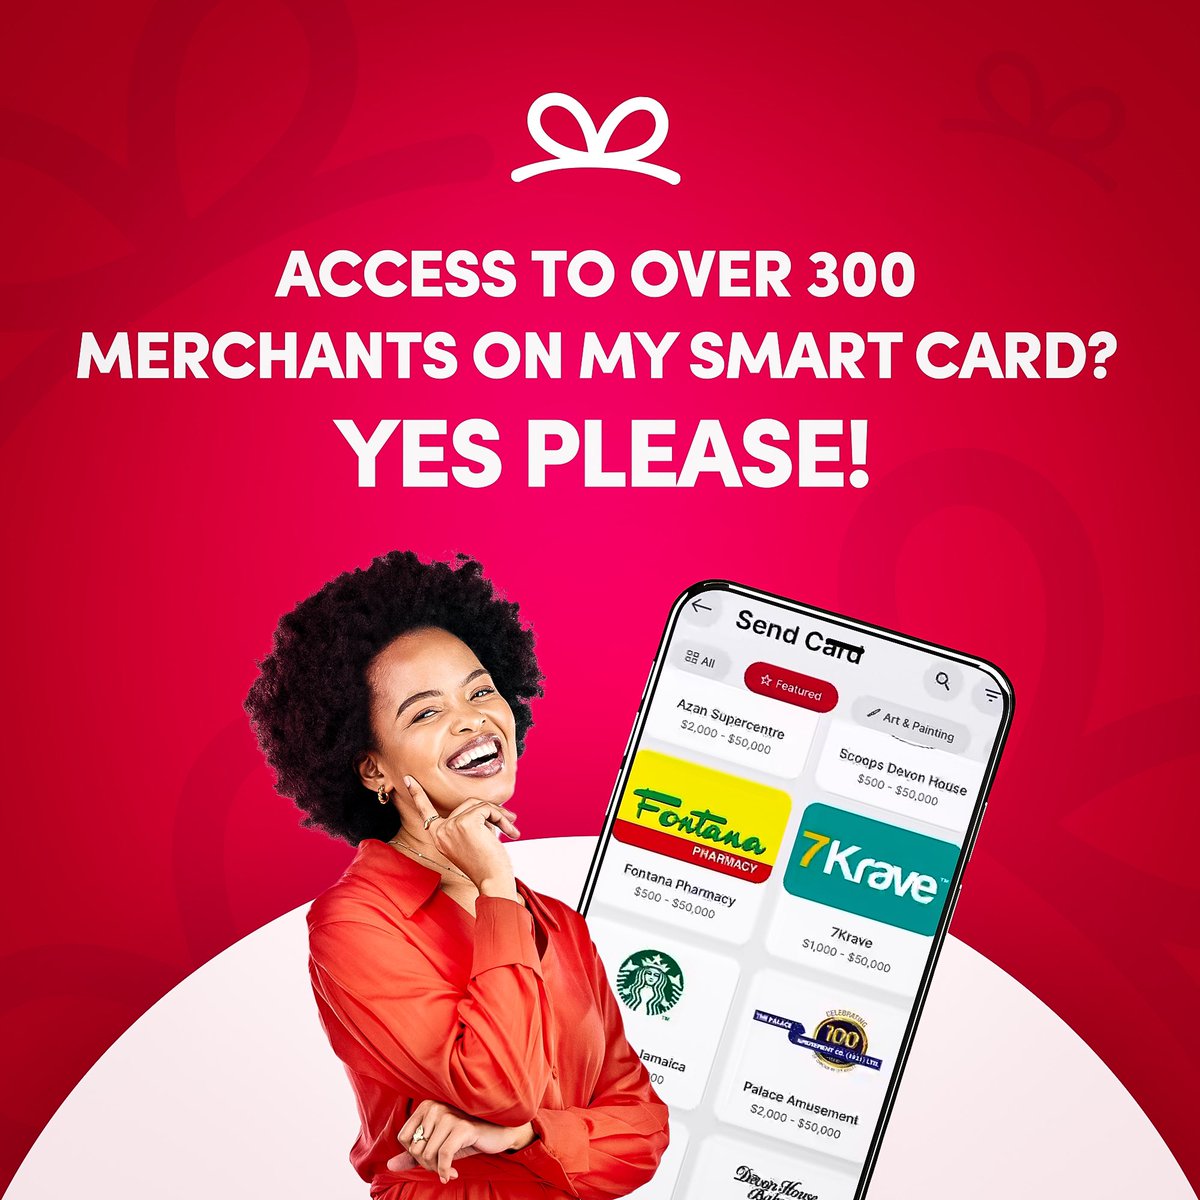 Unlock access to over 300+ merchants with ONE smart card.

Giftme, convenience at your fingertips!
#giftme #digitalgiftcard #smartcard #gifting #jamaicatech